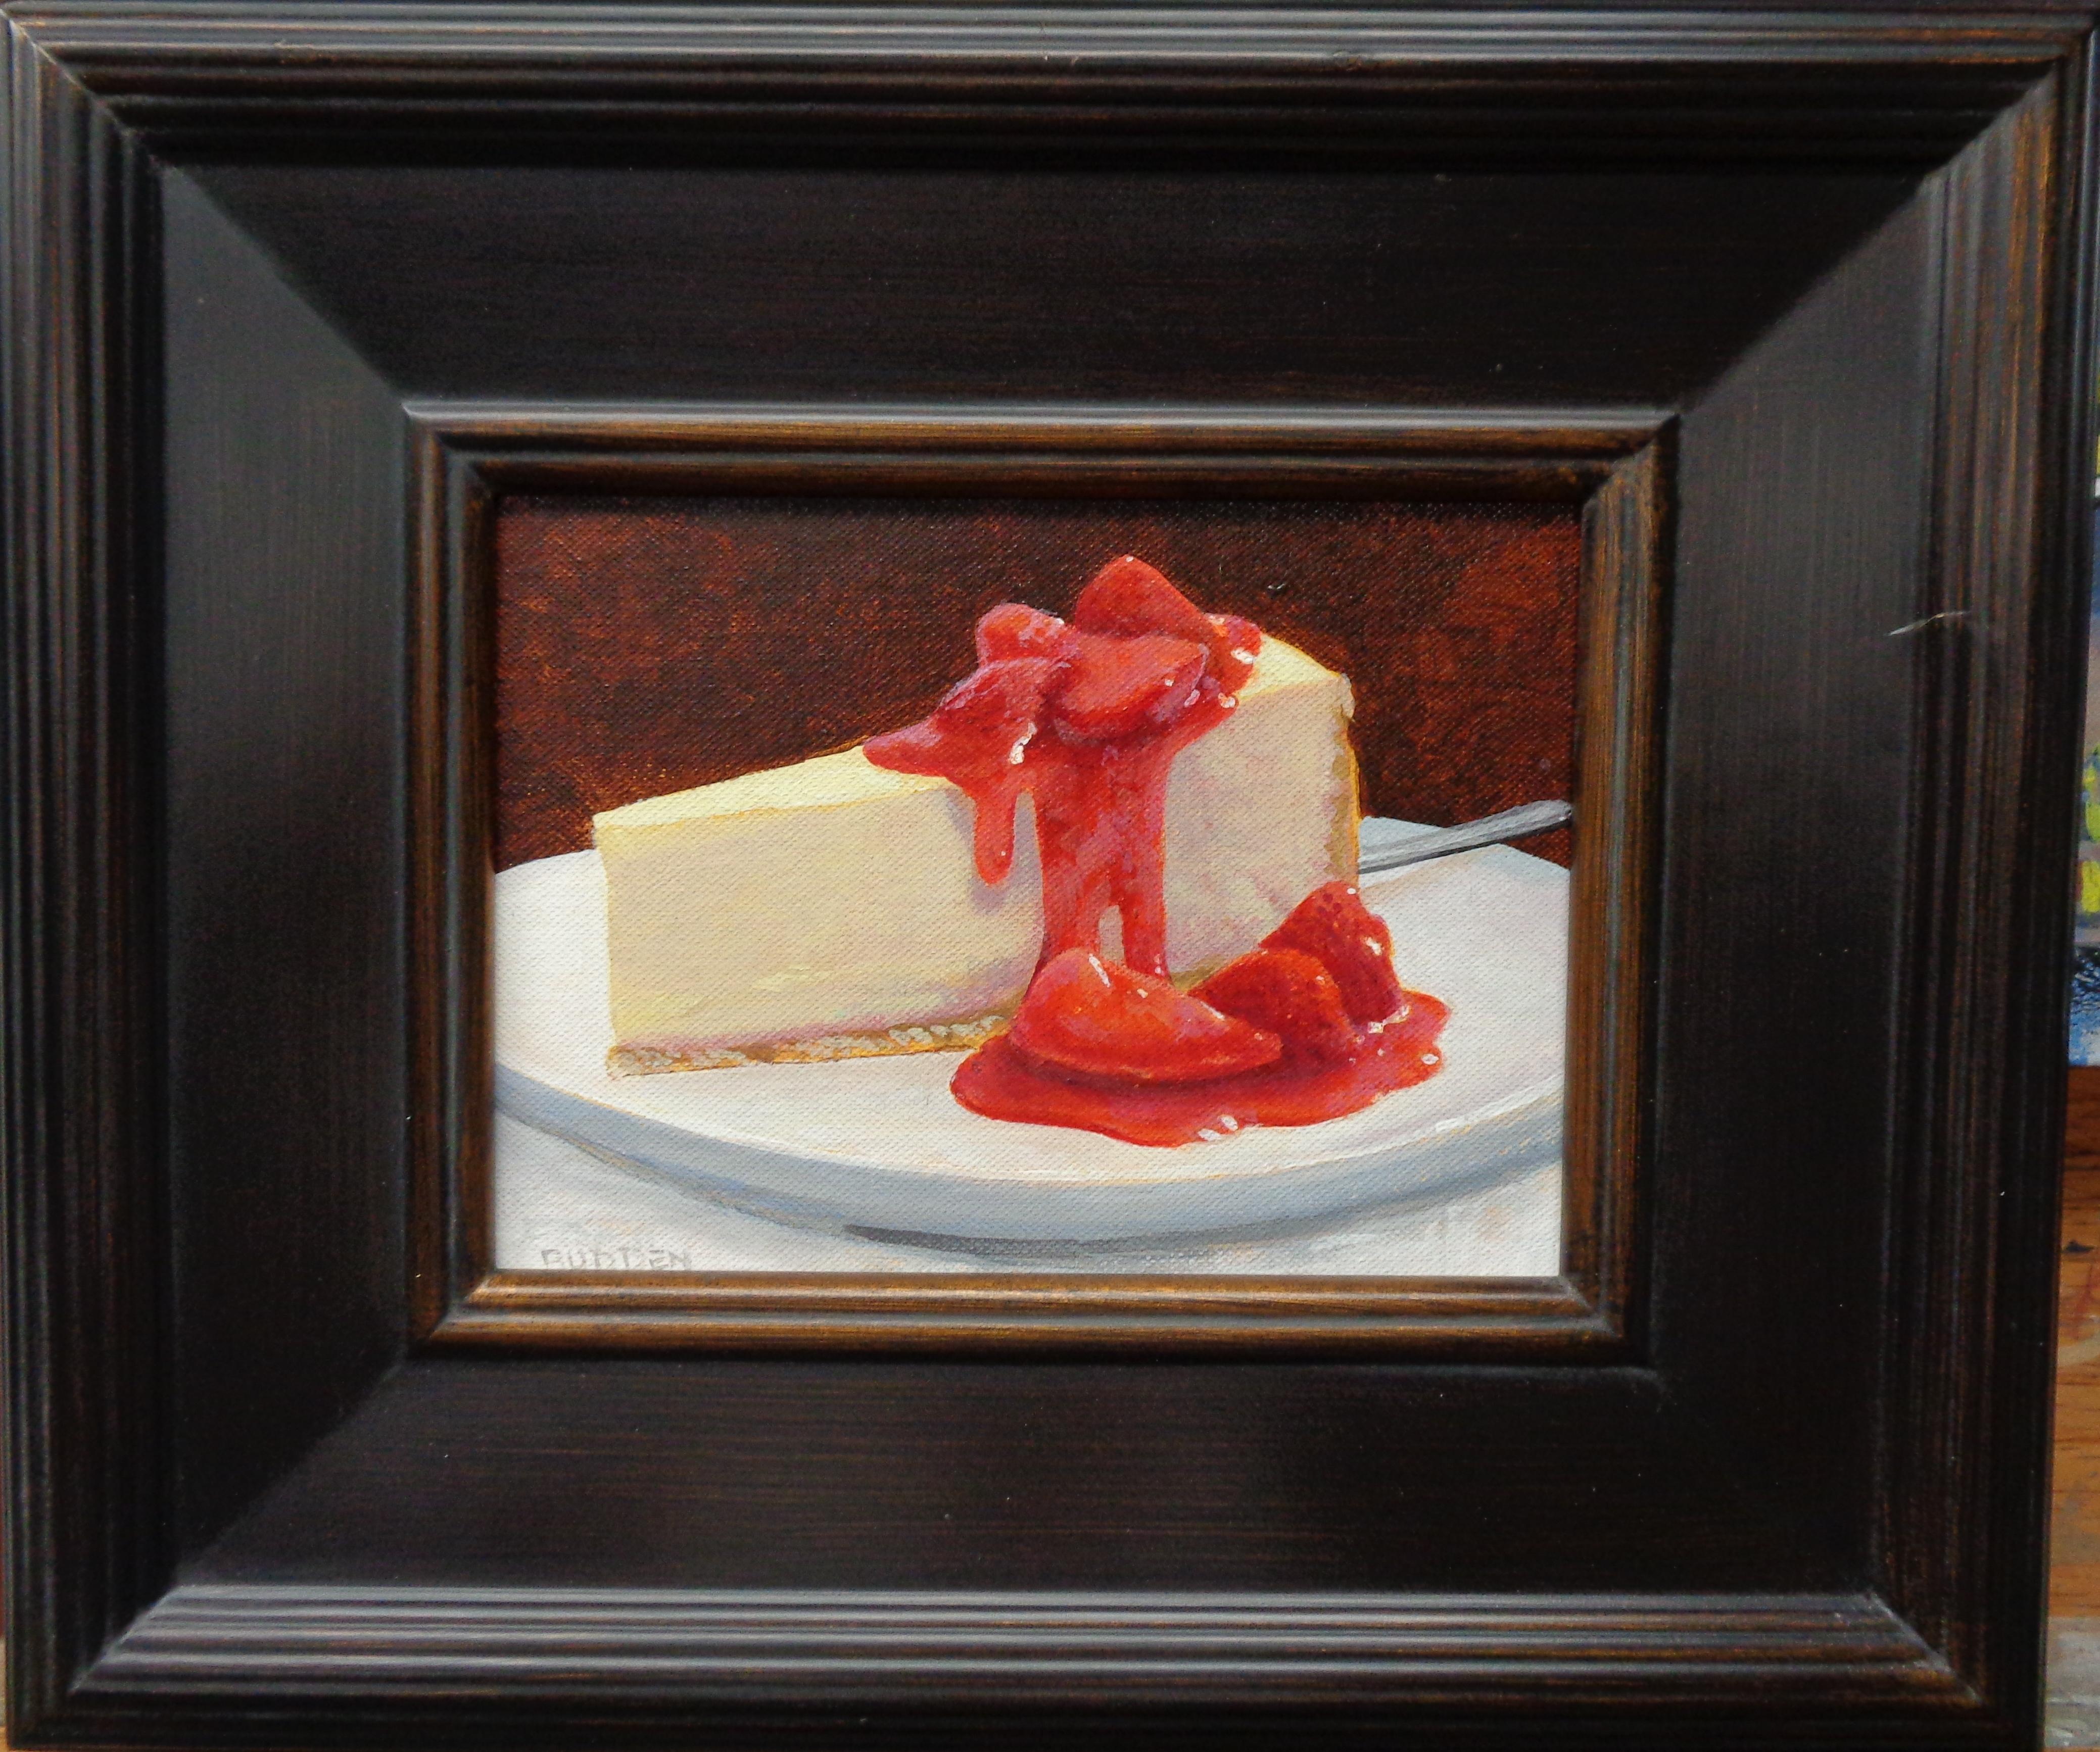 Strawberry Cheesecake
6x8 unframed, 11.5 x 13.5 framed
An acrylic painting on canvas by award winning contemporary artist Michael Budden that showcases a piece of strawberry cheesecake. Painting is new and frame shows age.
ARTIST'S STATEMENT
I have